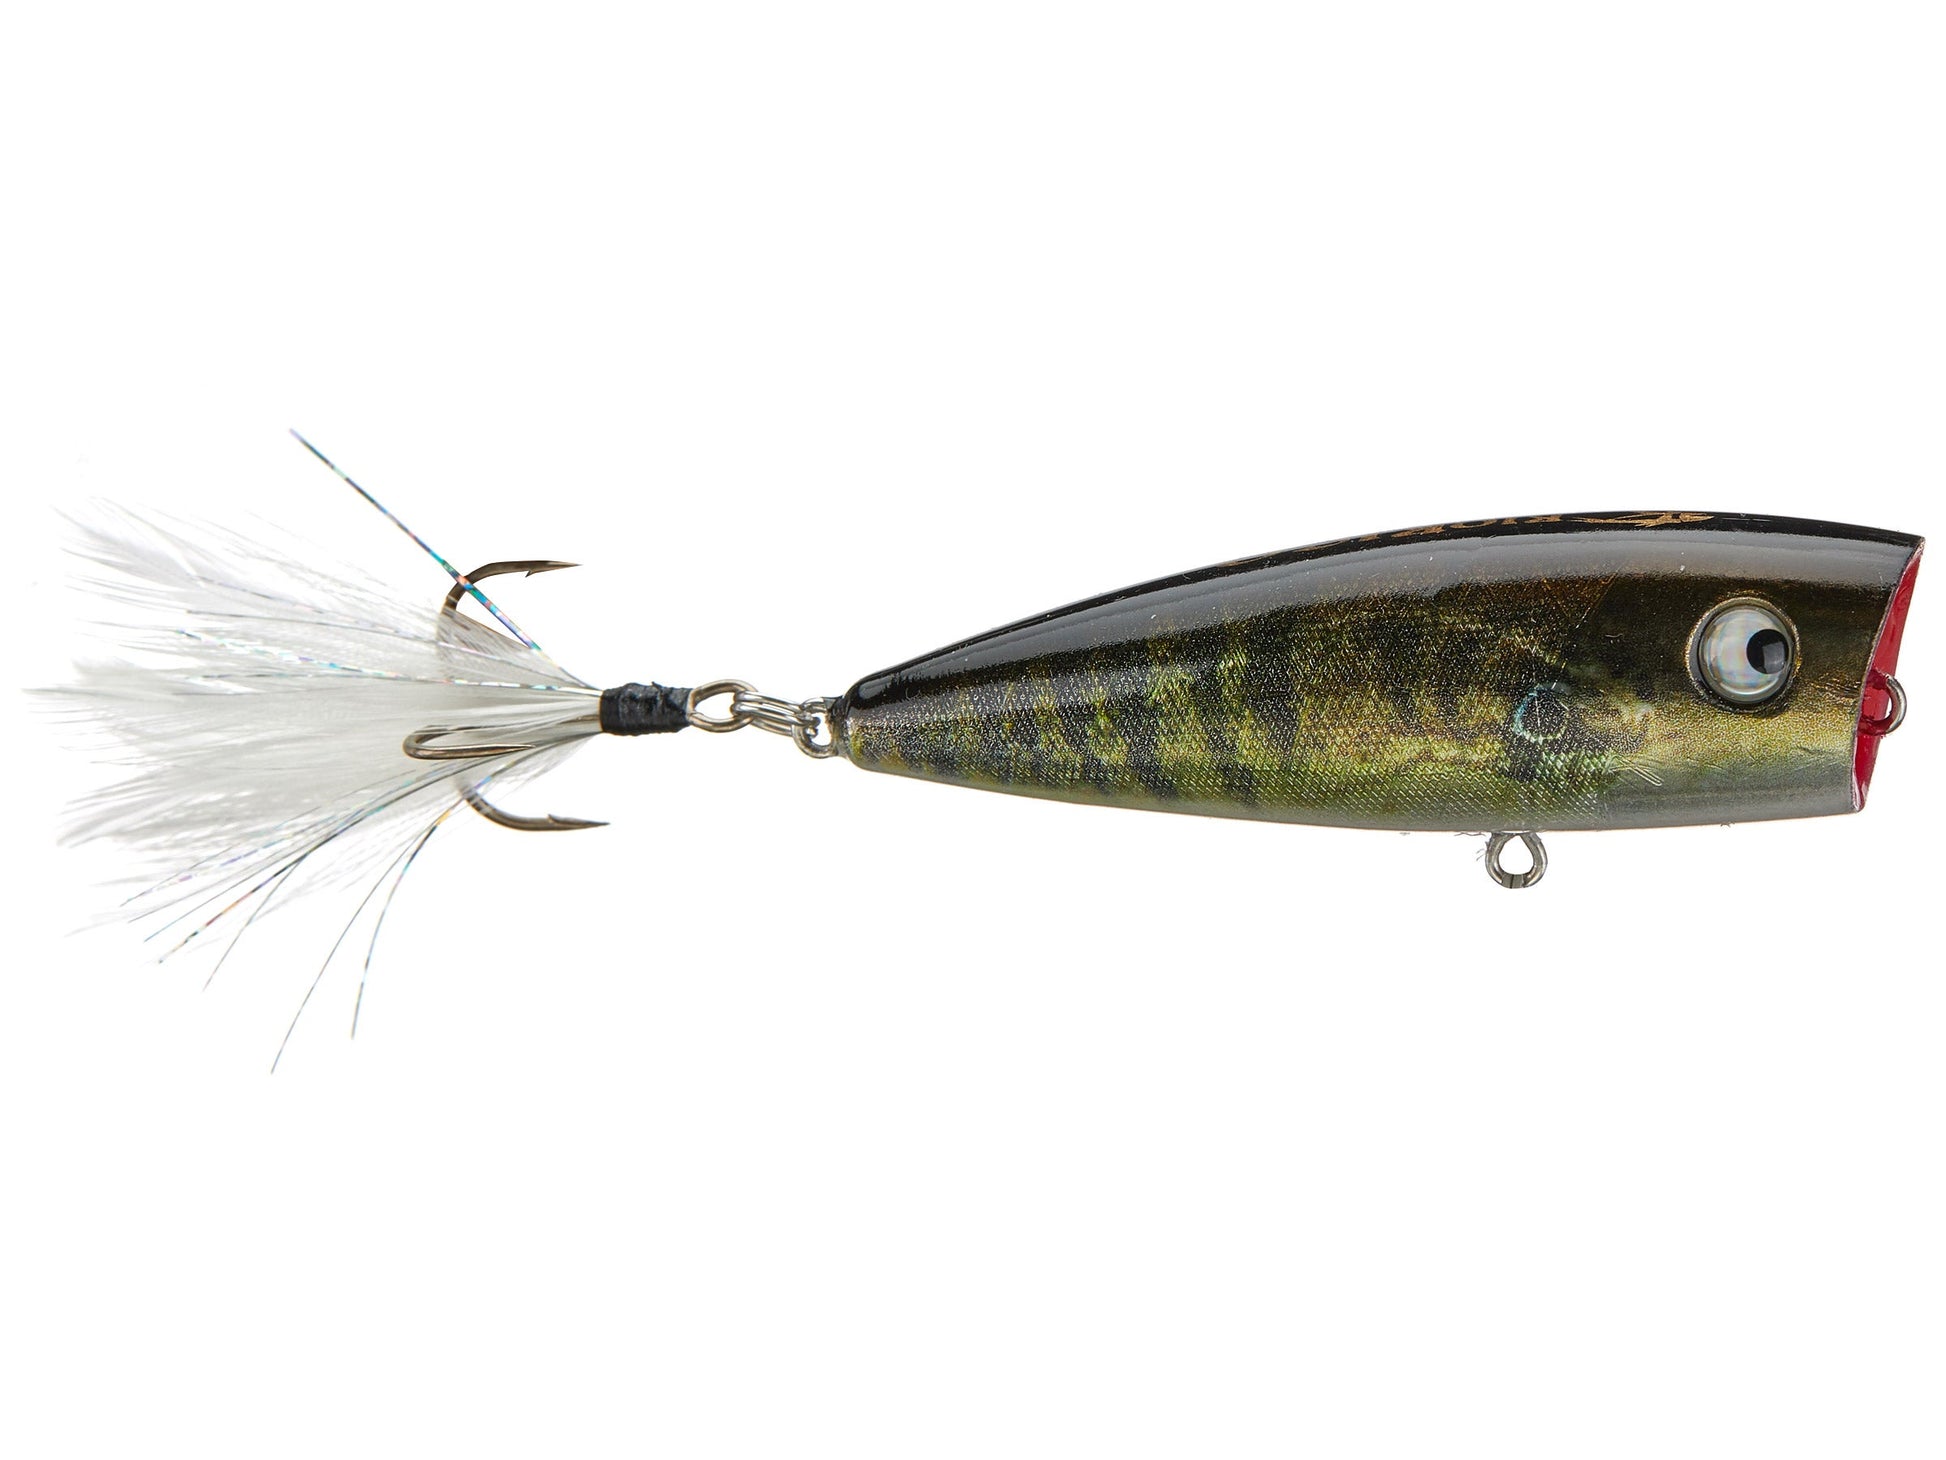 Salomone: Four colors for streamer fishing right now